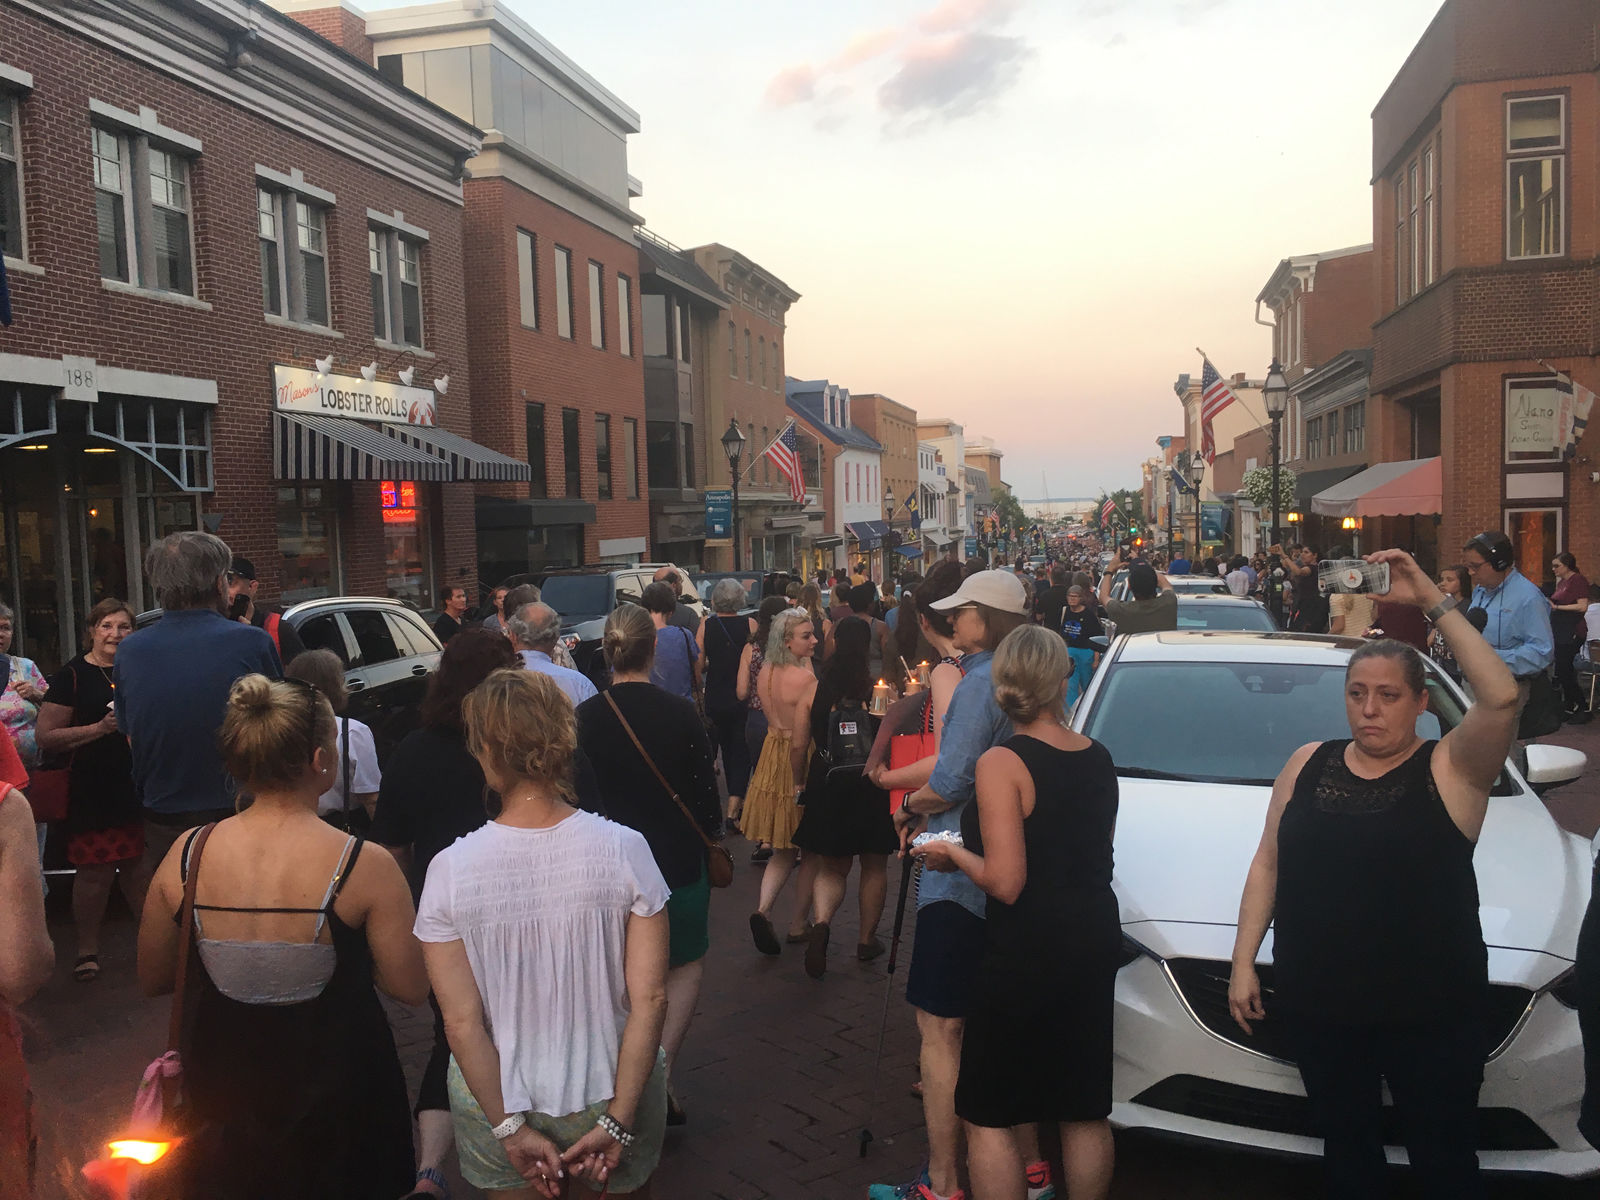 Mourners holding candles on the streets of Annapolis, Maryland, on Friday to honor those who were killed in a shooting at the Capital Gazette. (WTOP/Mike Murillo)